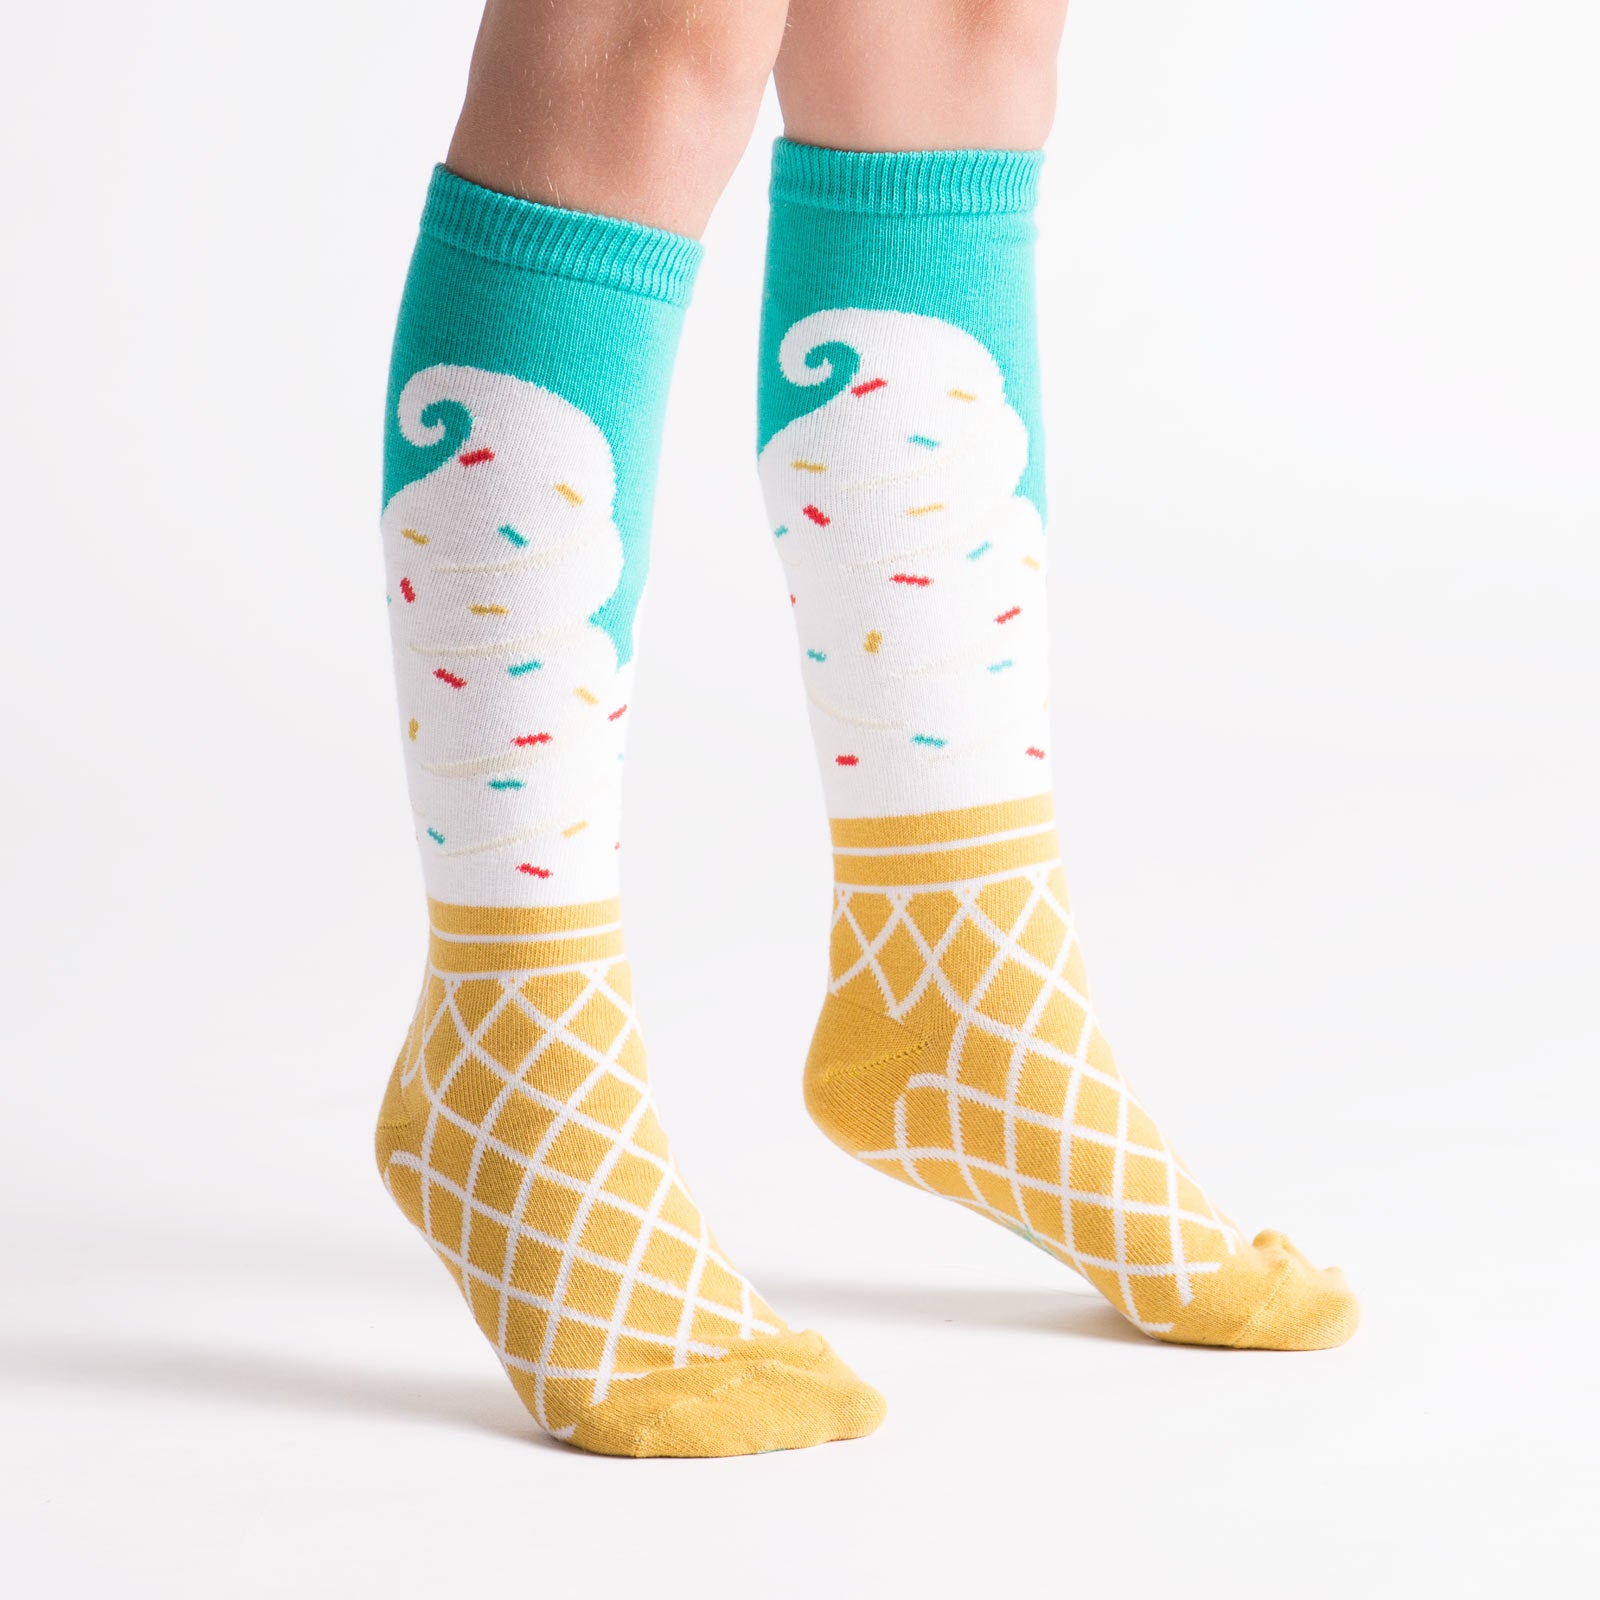 These kids' knee socks with ice cream cones are a sweet way to kick and lick!